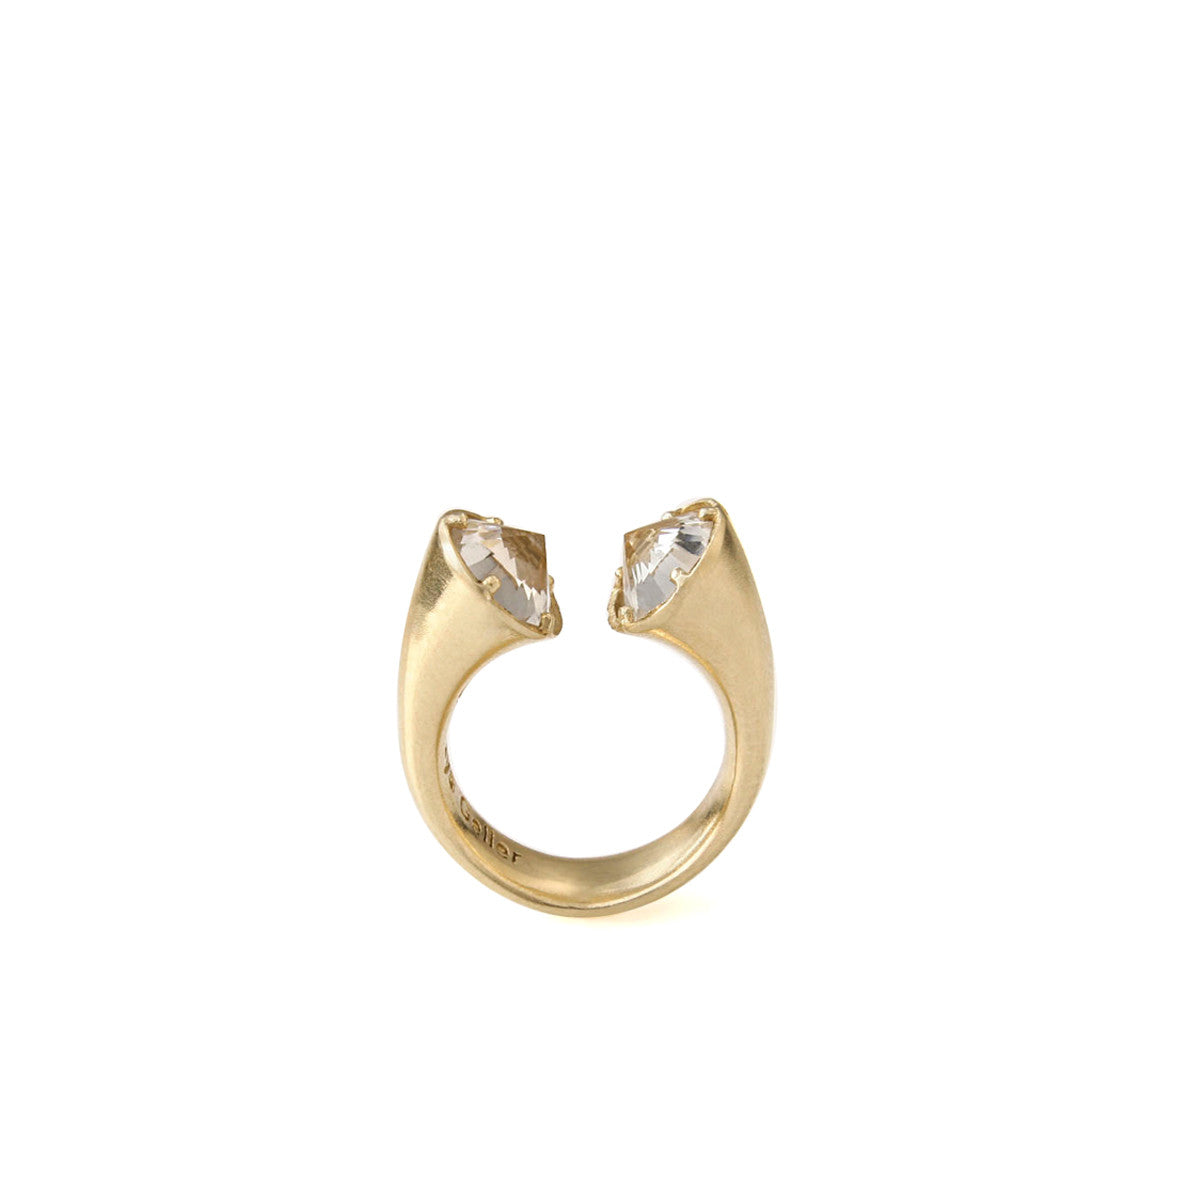 14k gold open ring with crystals